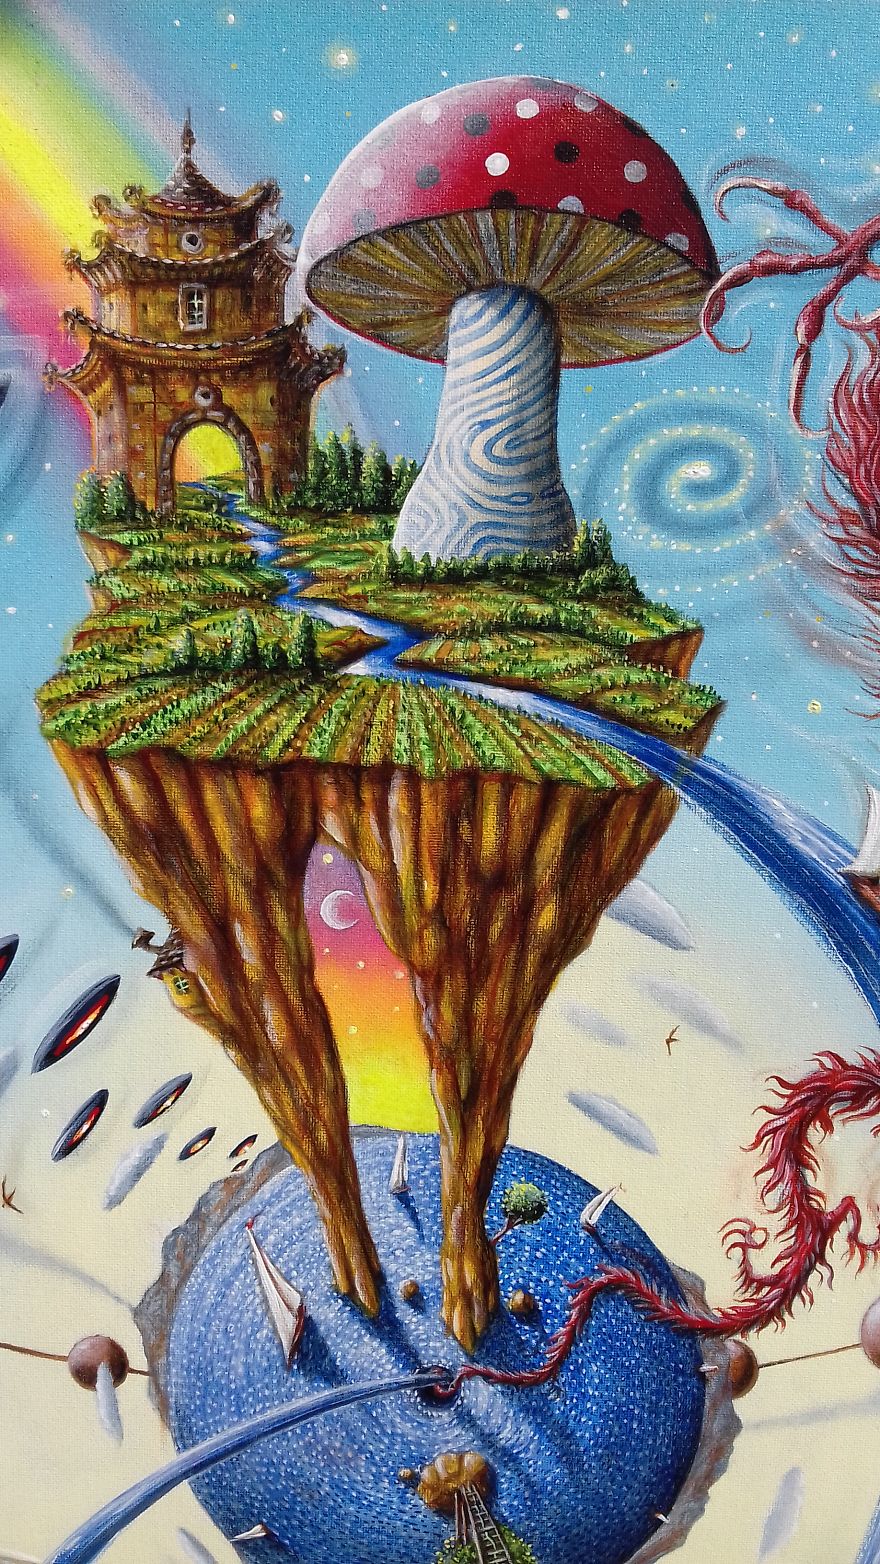 Enjoy A Trippy Ride For Your Mind With My Paintings